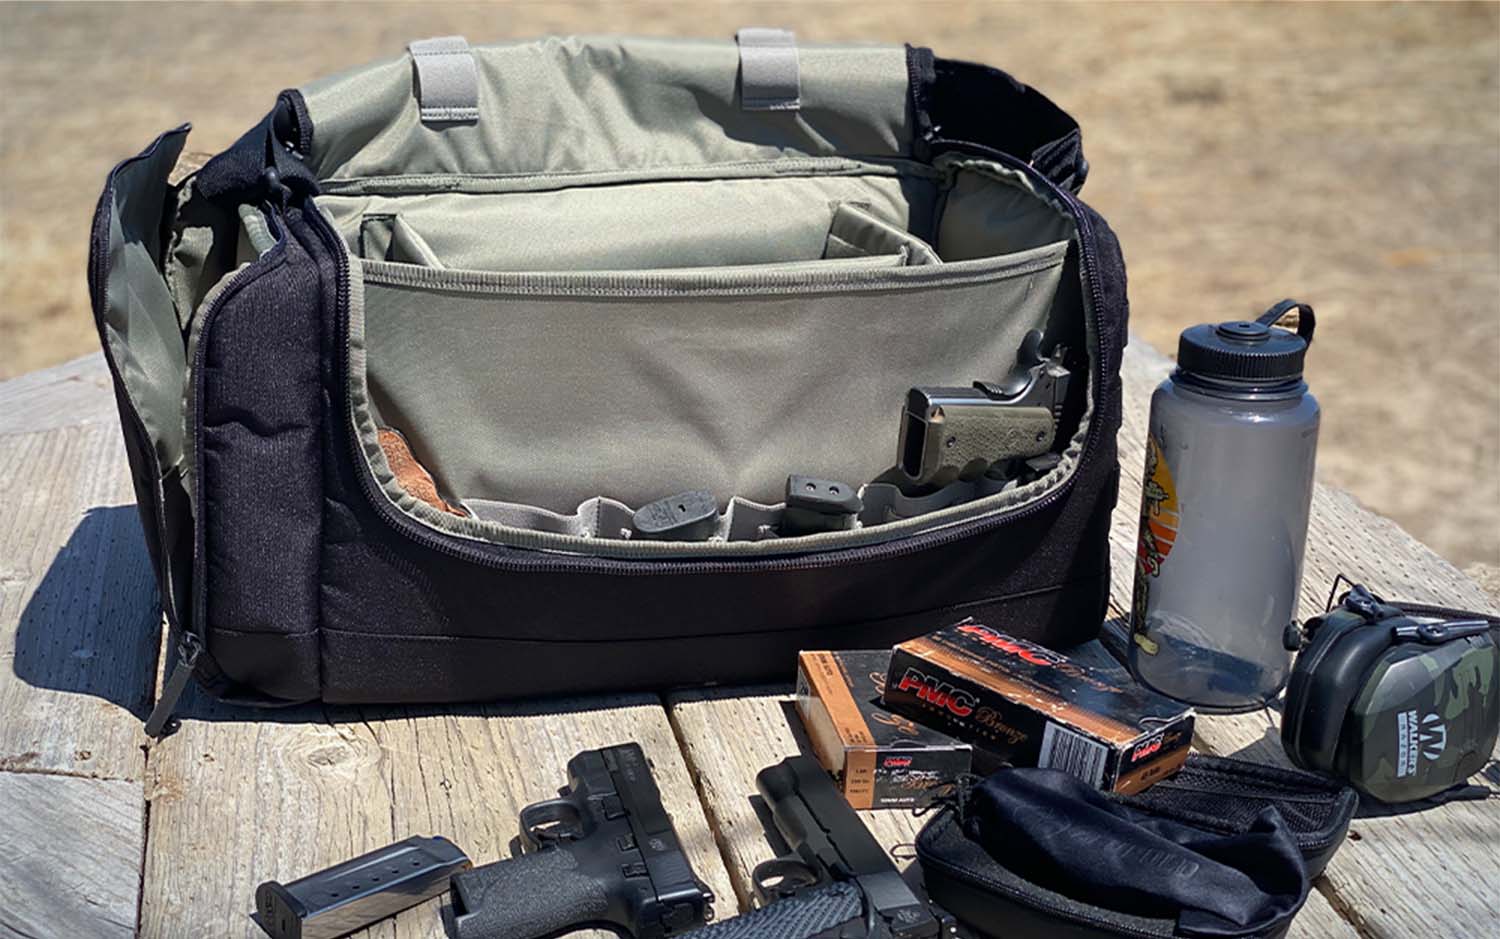 Keep all your gear together and organized